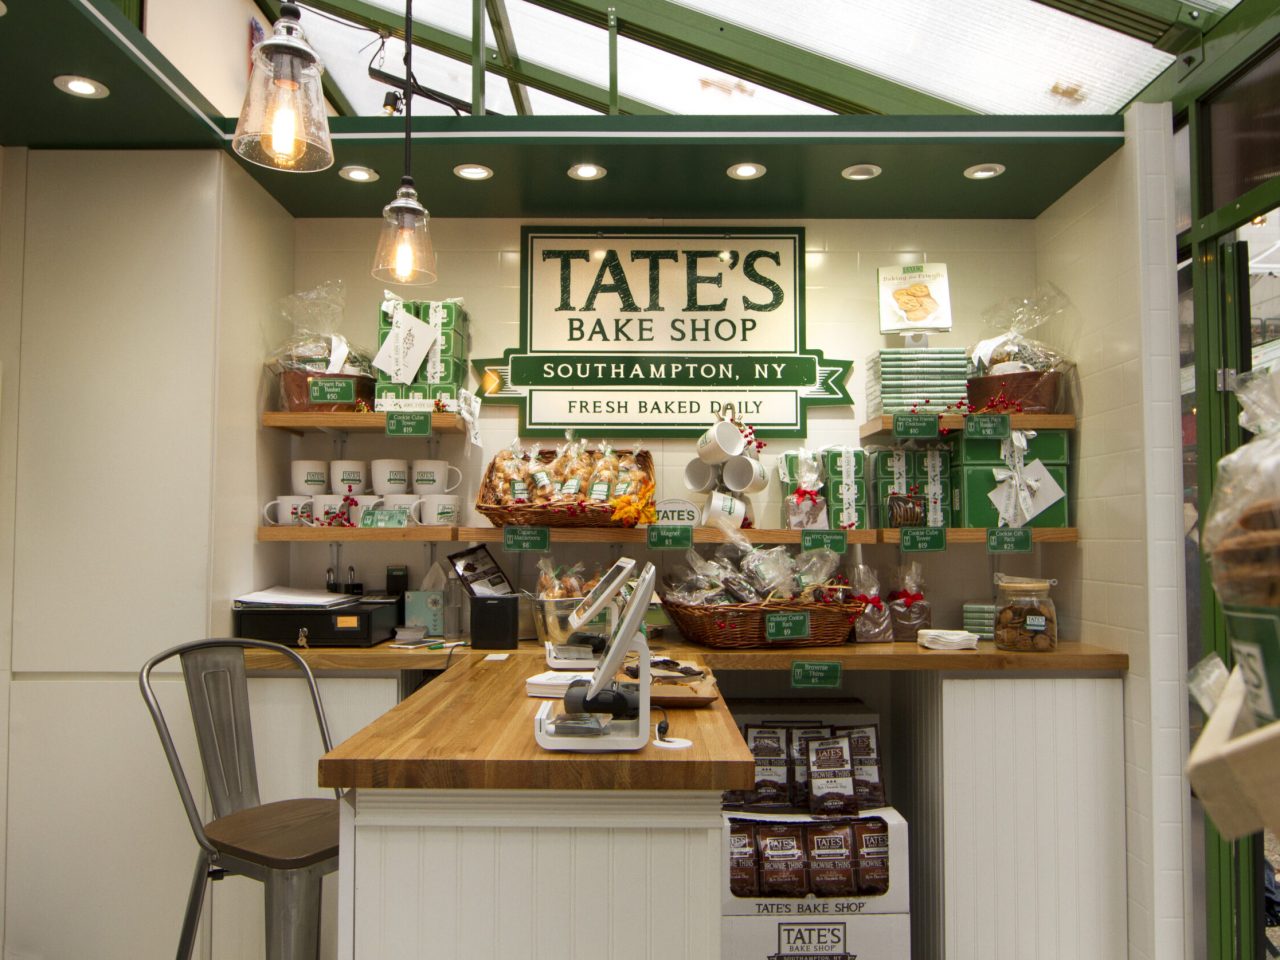 Check-Out Area View of Tate's Bake Shop Brand Activation Site in Bryant Park, New York City